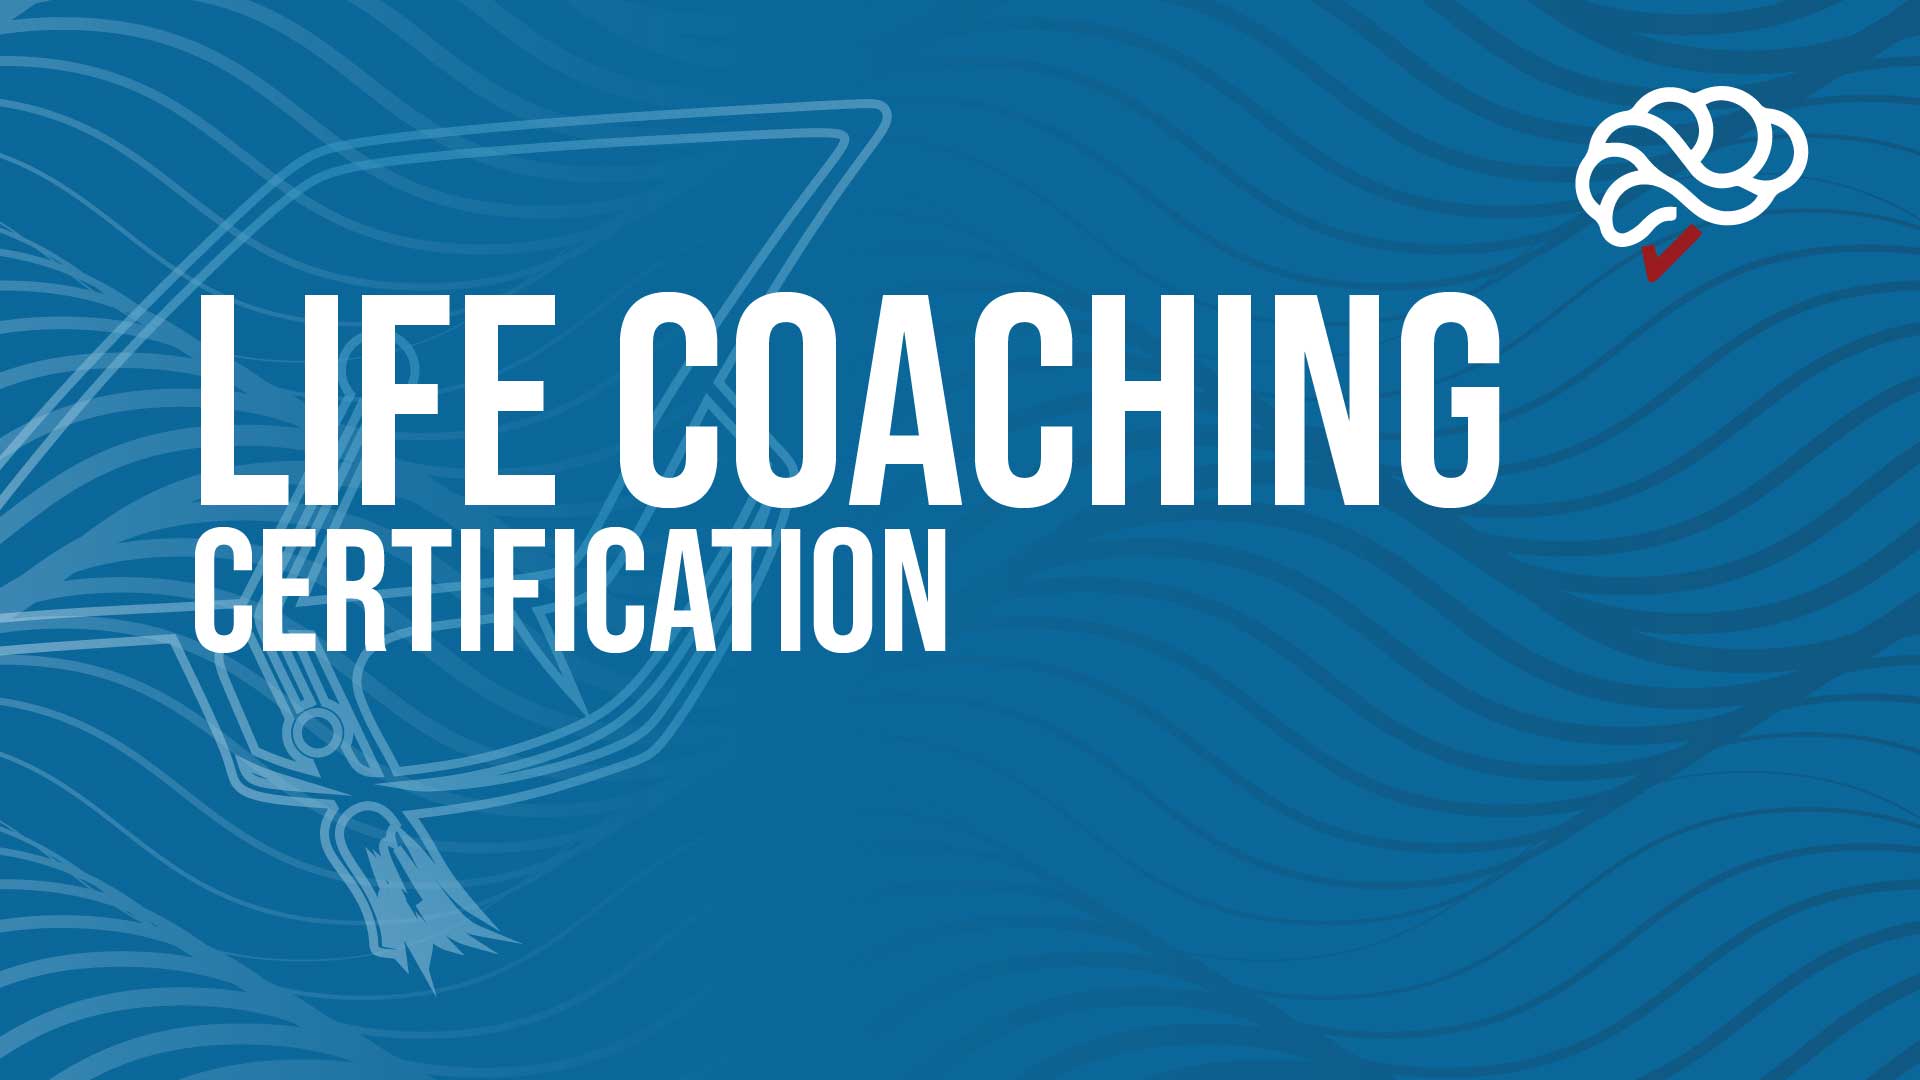 Life Coaching Certification Course banner